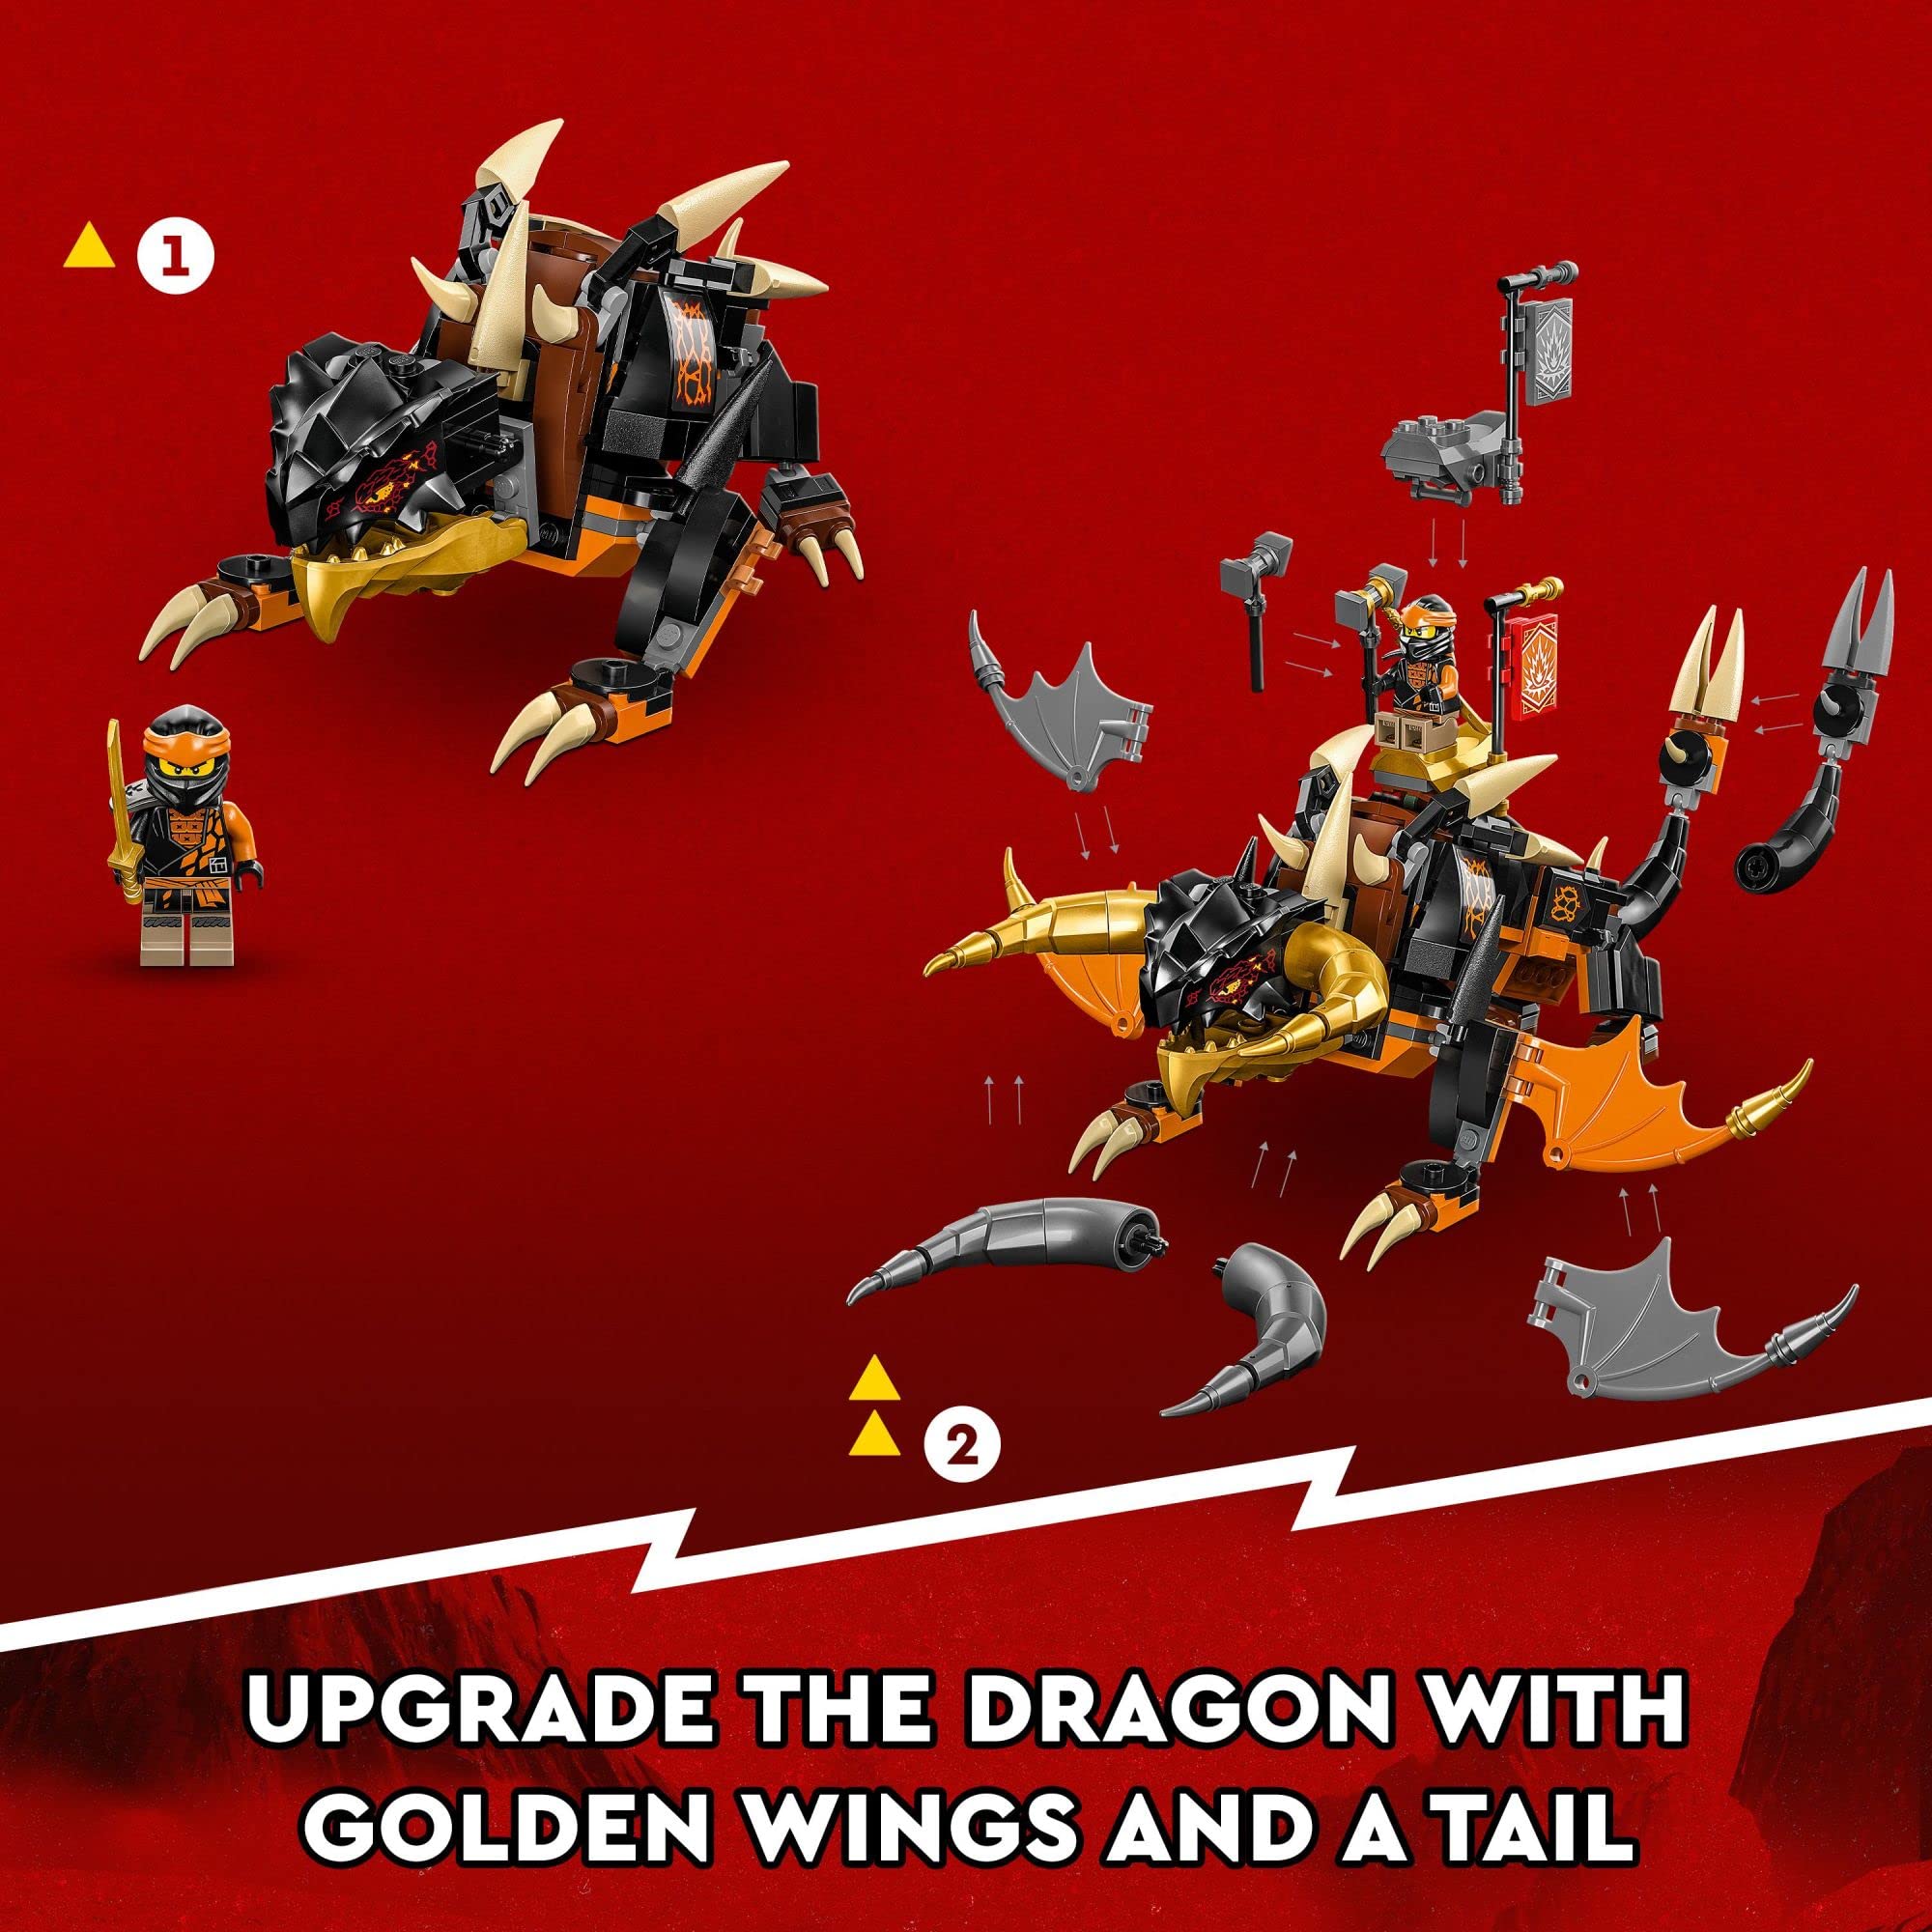 LEGO NINJAGO Cole’s Earth Dragon EVO 71782, Upgradable Action Toy Figure for Boys and Girls with Battle Scorpion Creature and 2 Minifigures, 2023 Playset